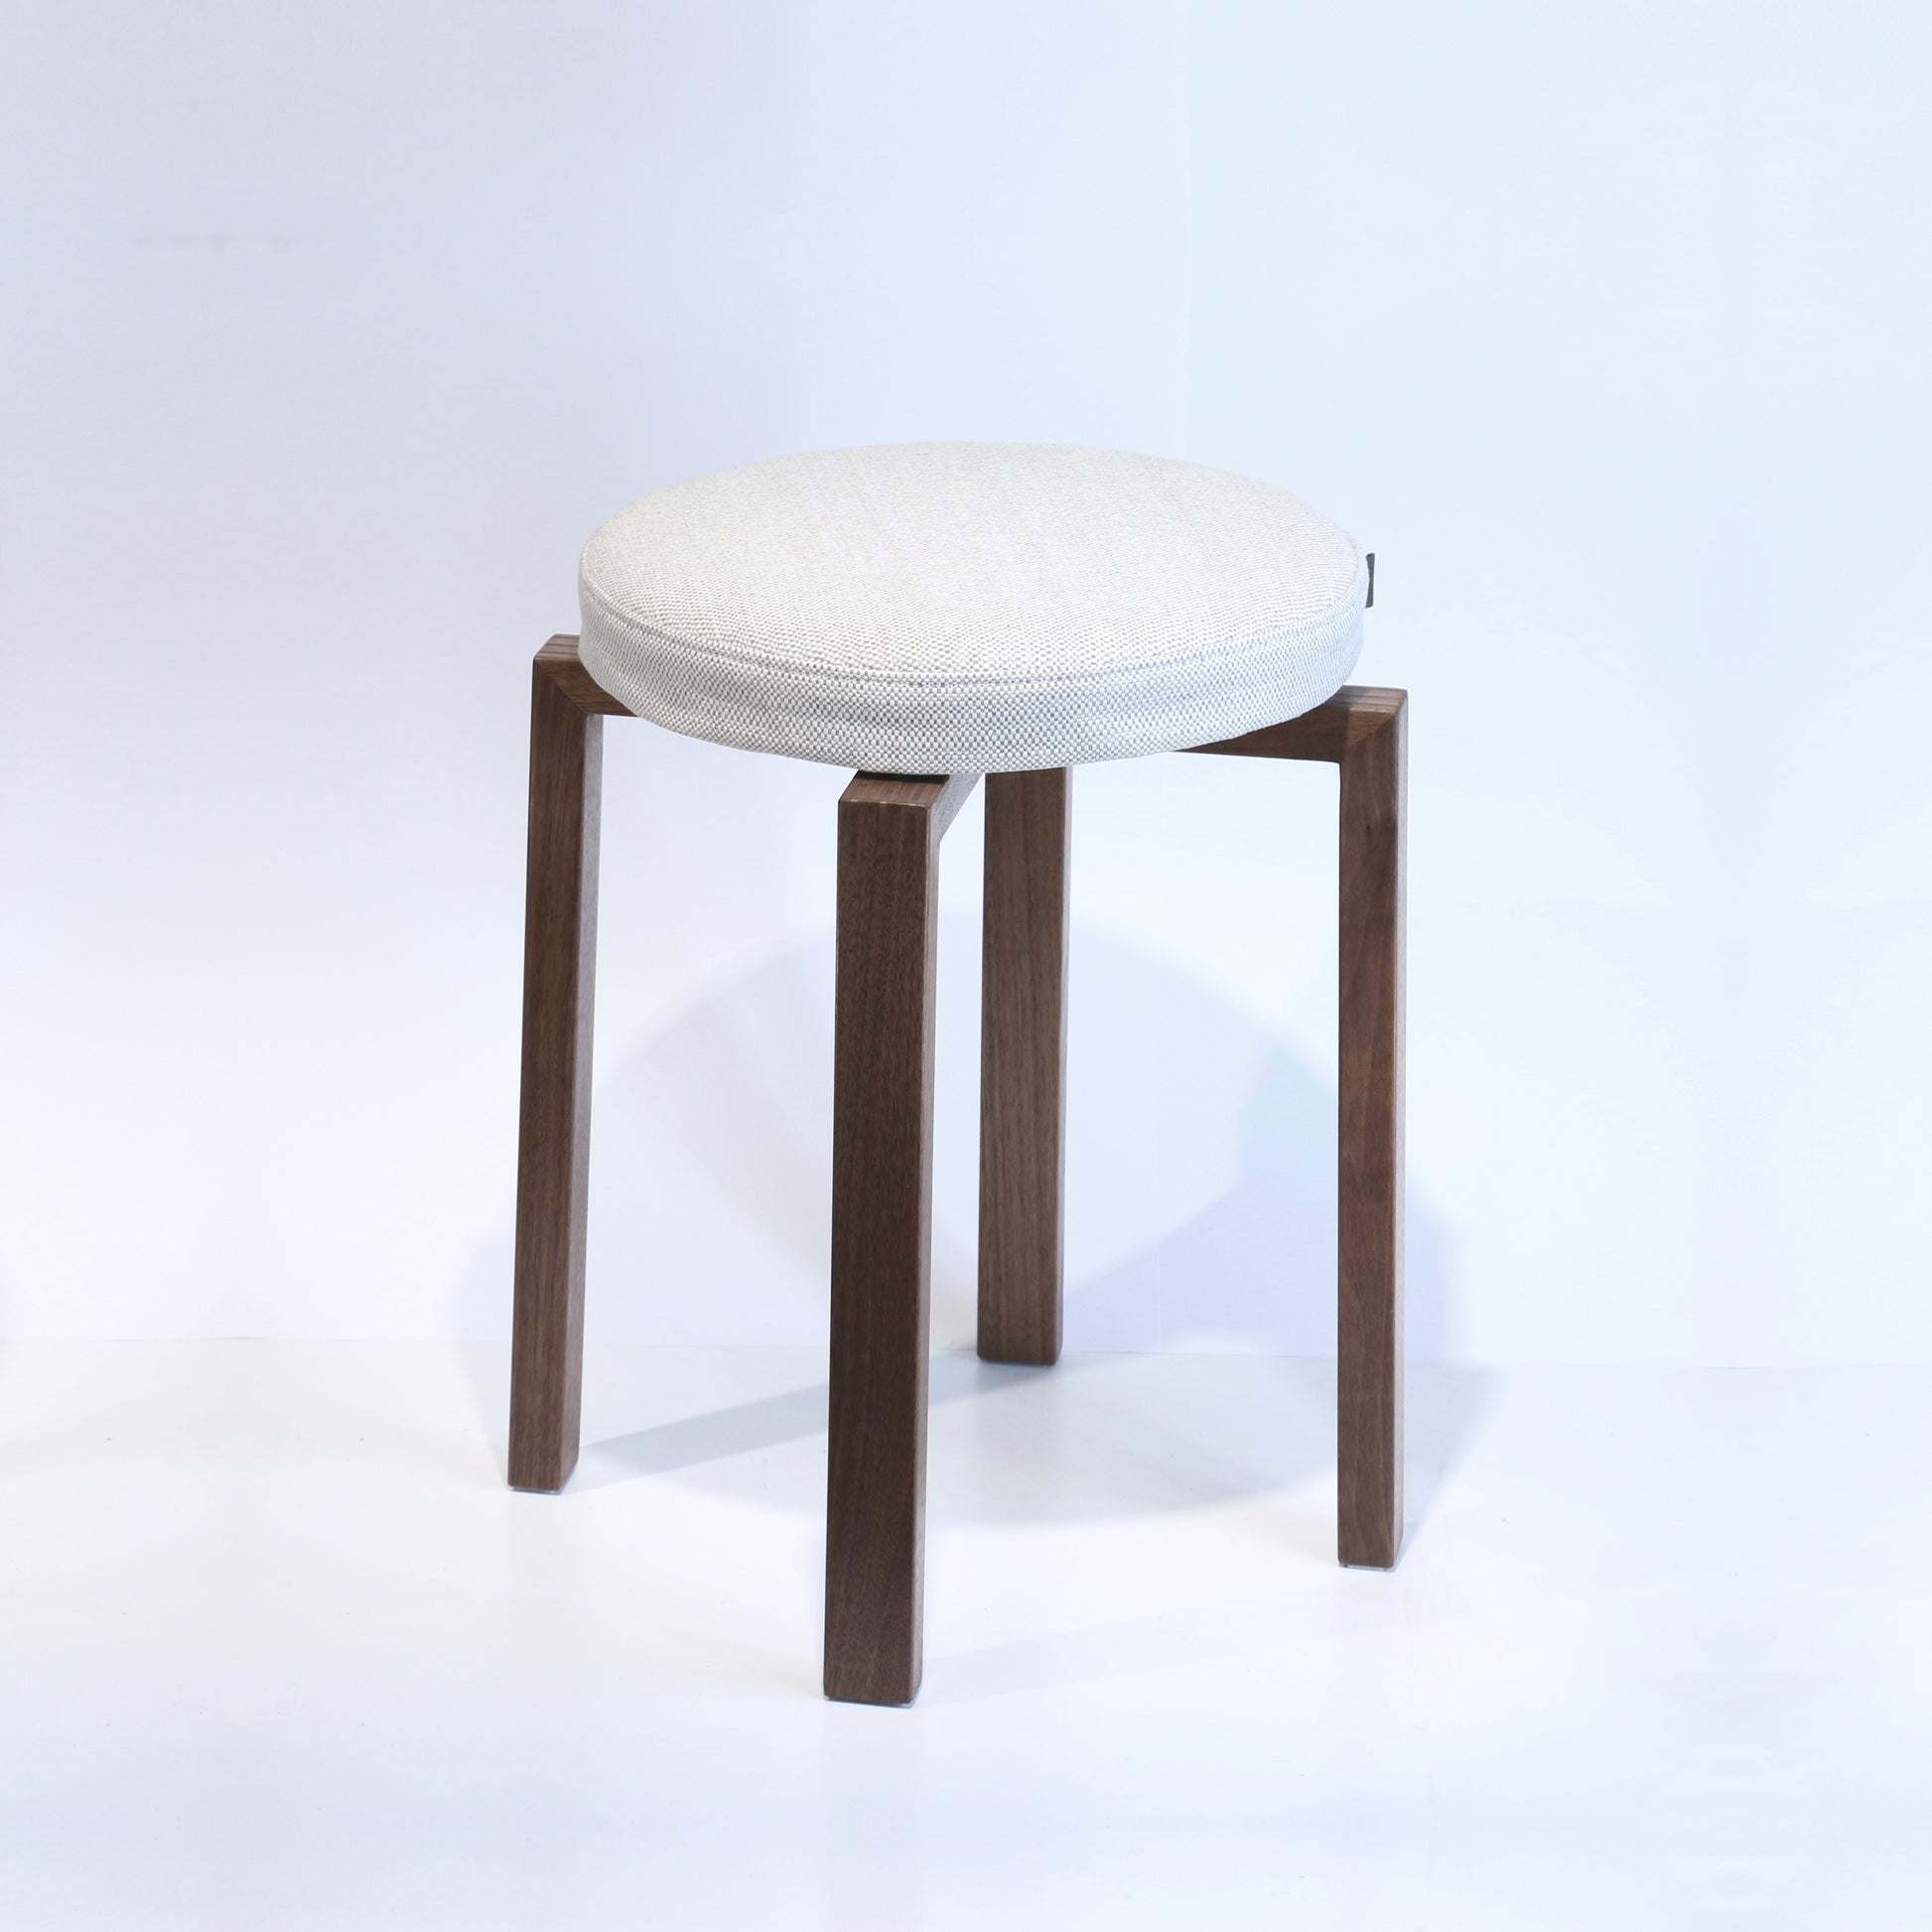 Seat pad for stool by Deka